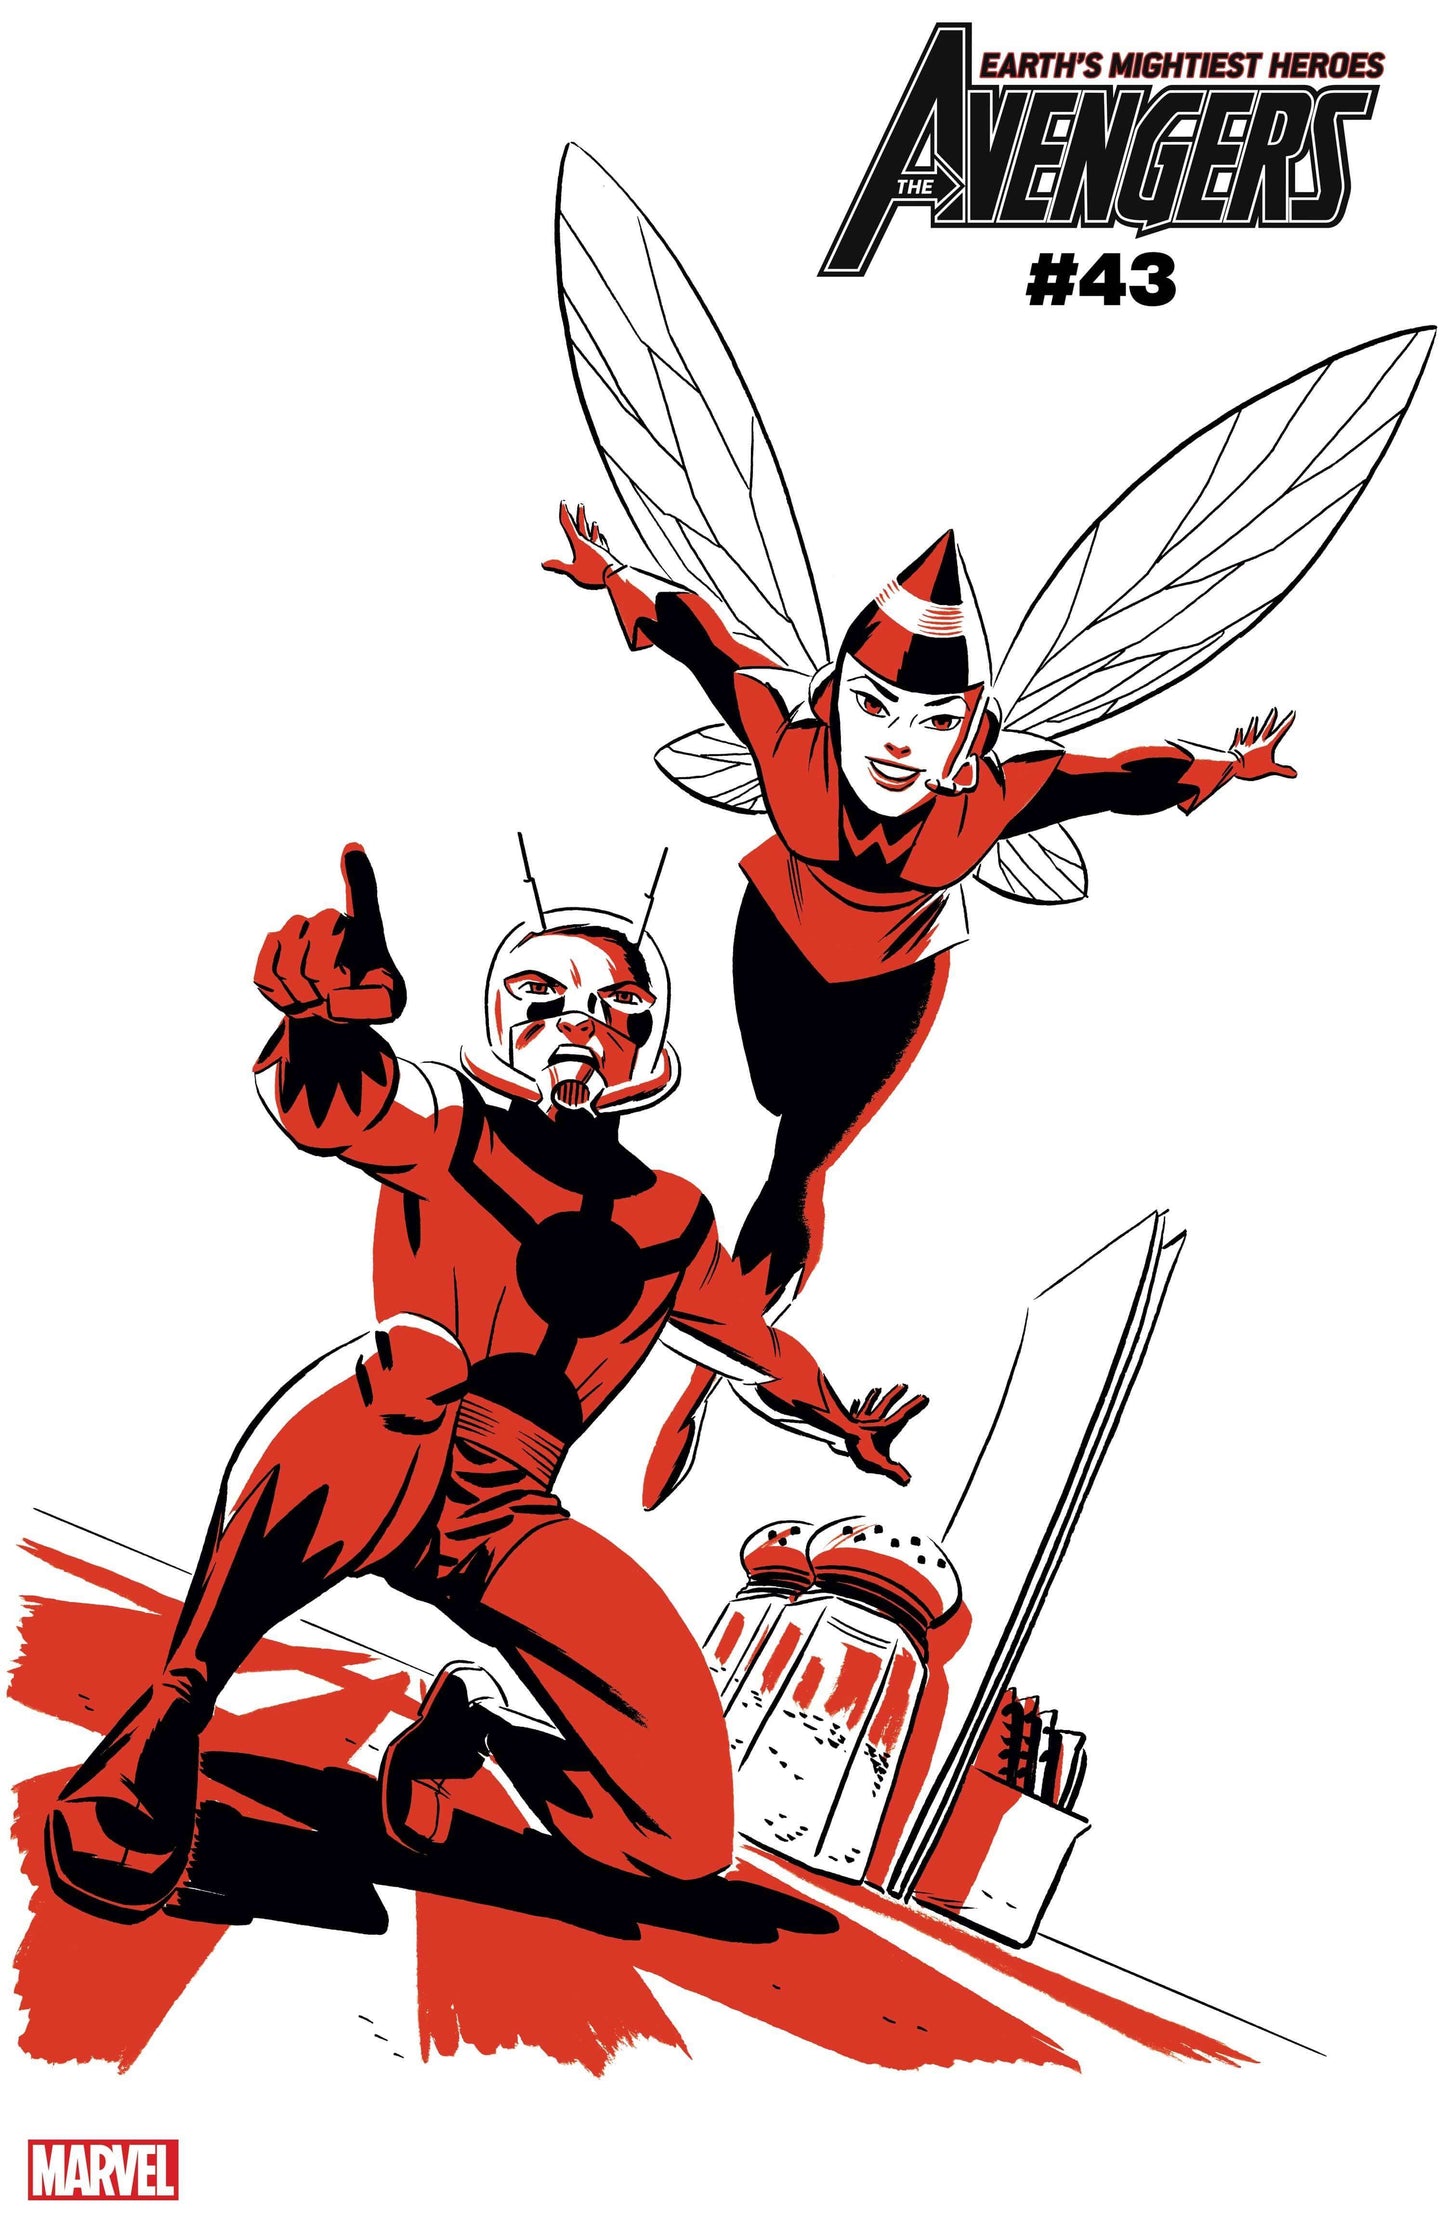 Avengers #43 D Michael Cho Ant-Man And Wasp Two-Tone Variant (03/03/2021) Marvel